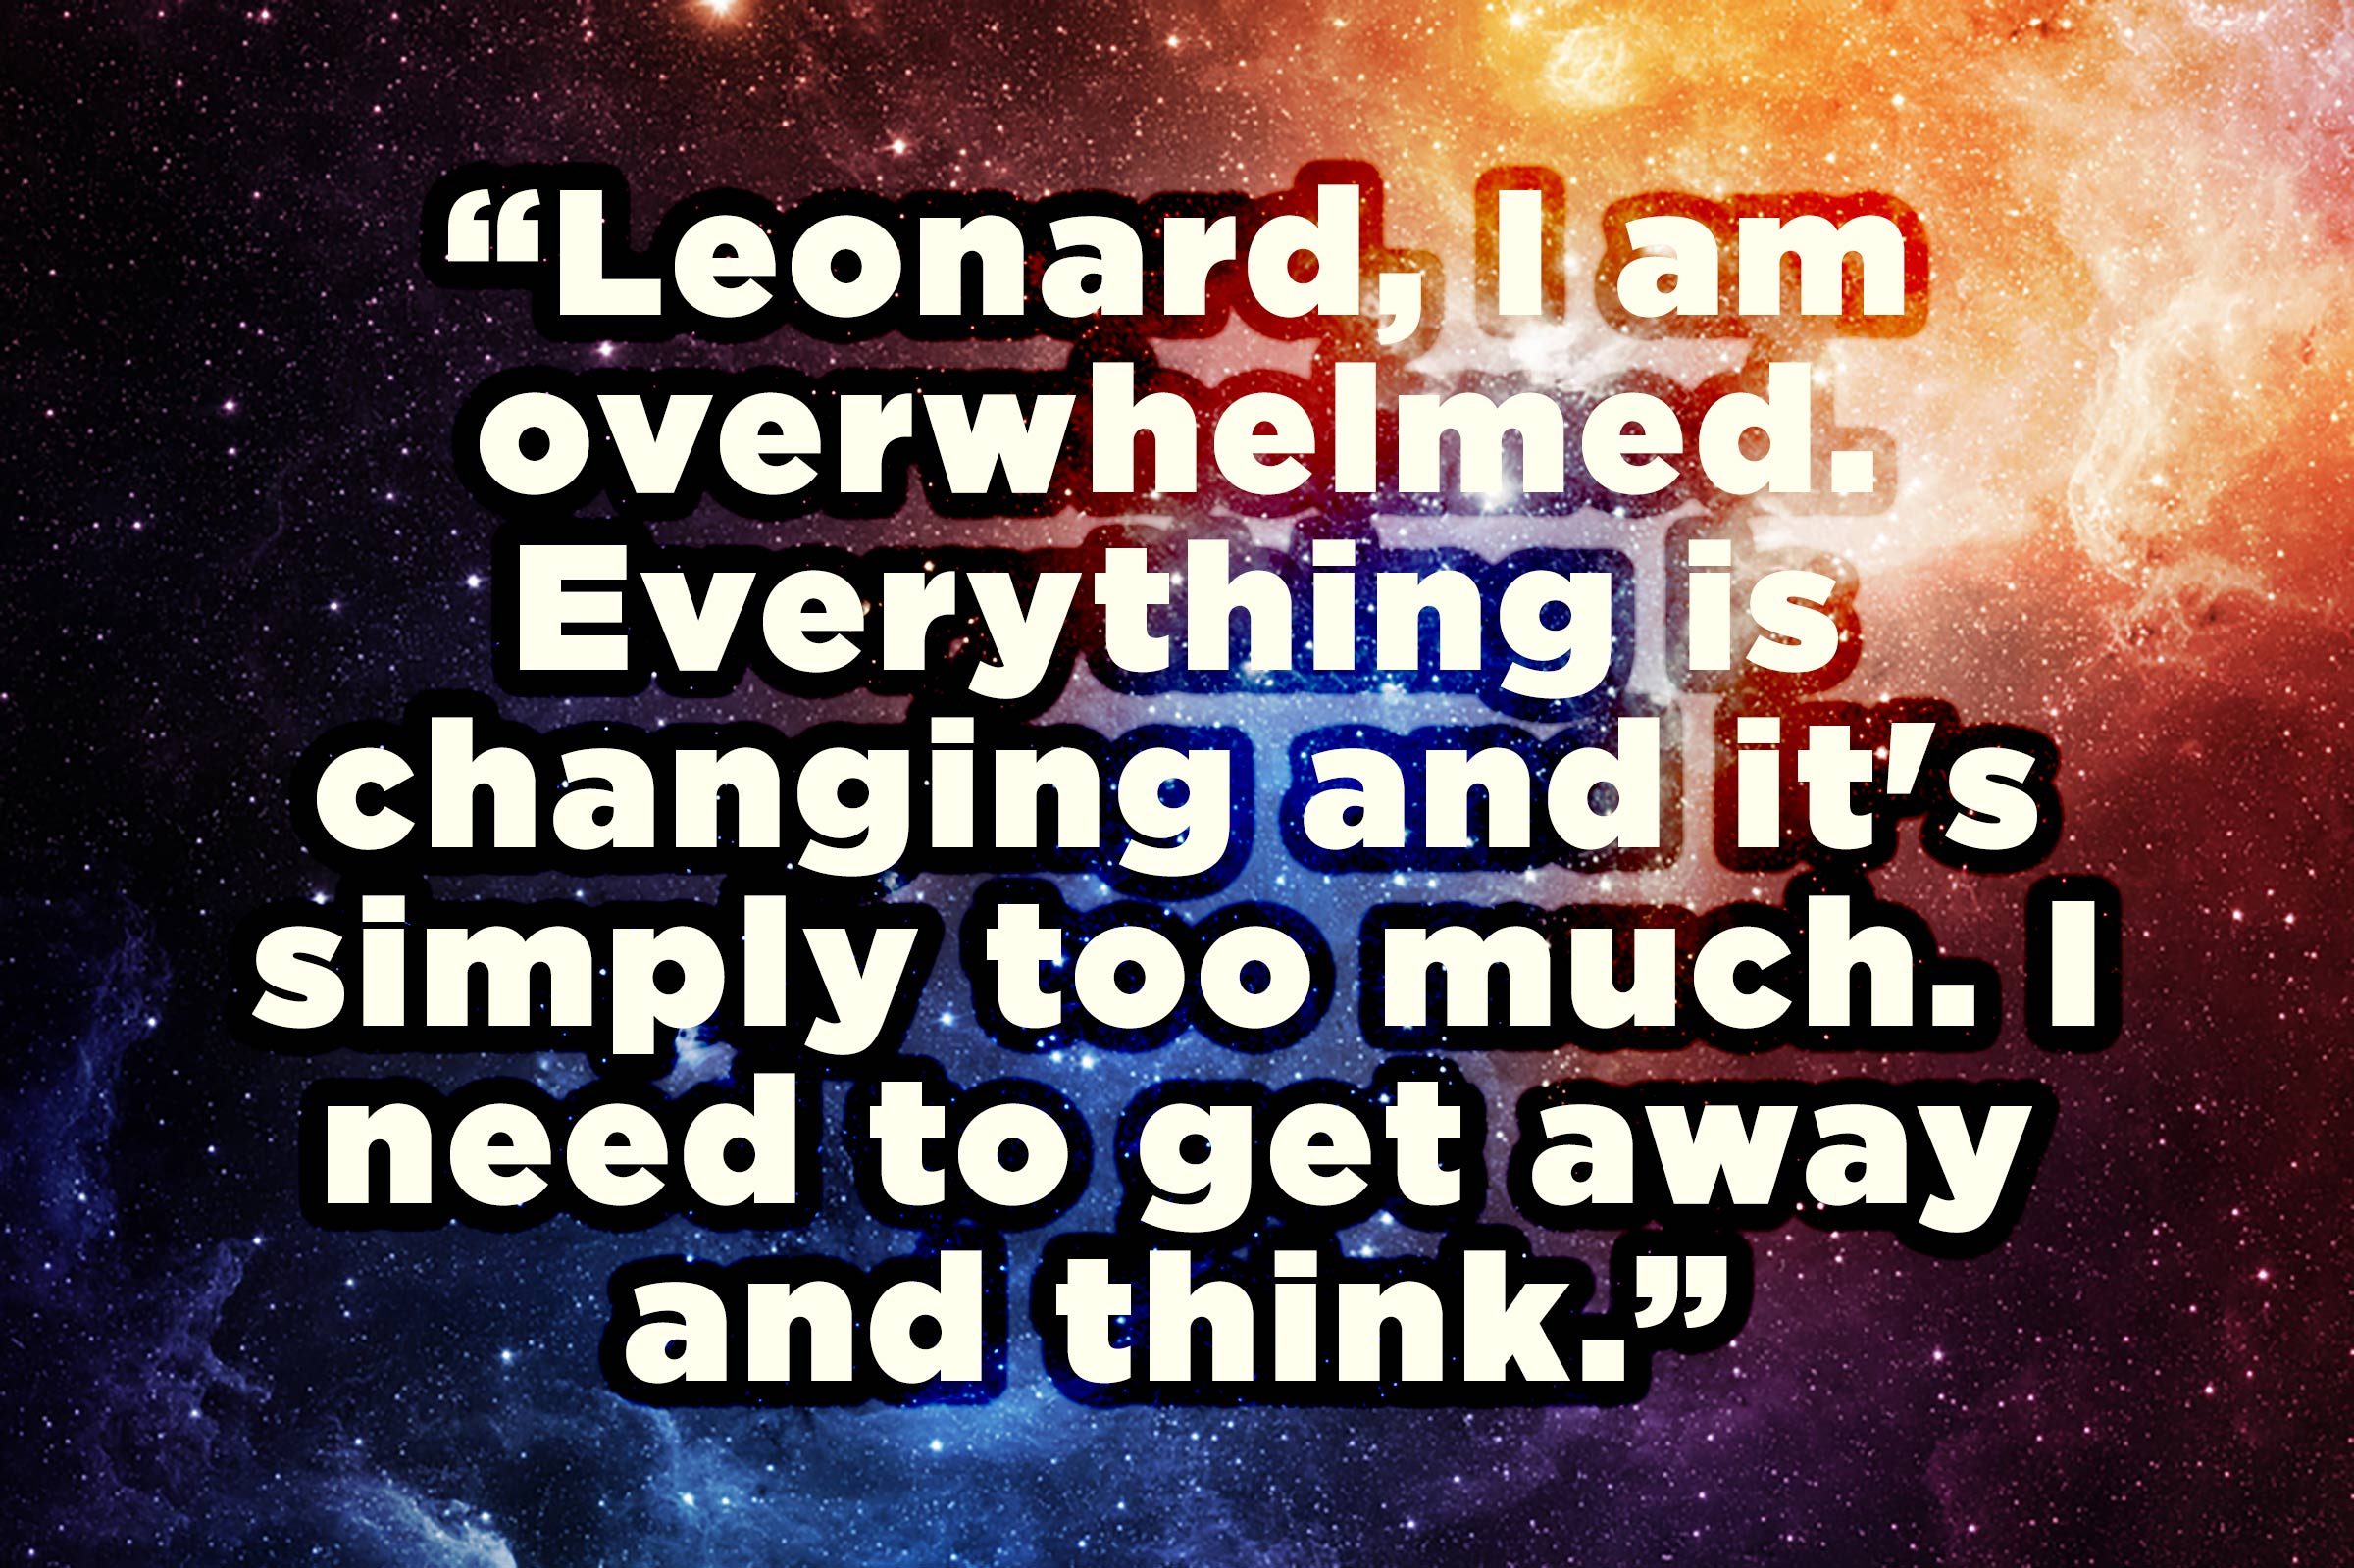 5 “Big Bang Theory” Quotes That Can Make You a Better Parent